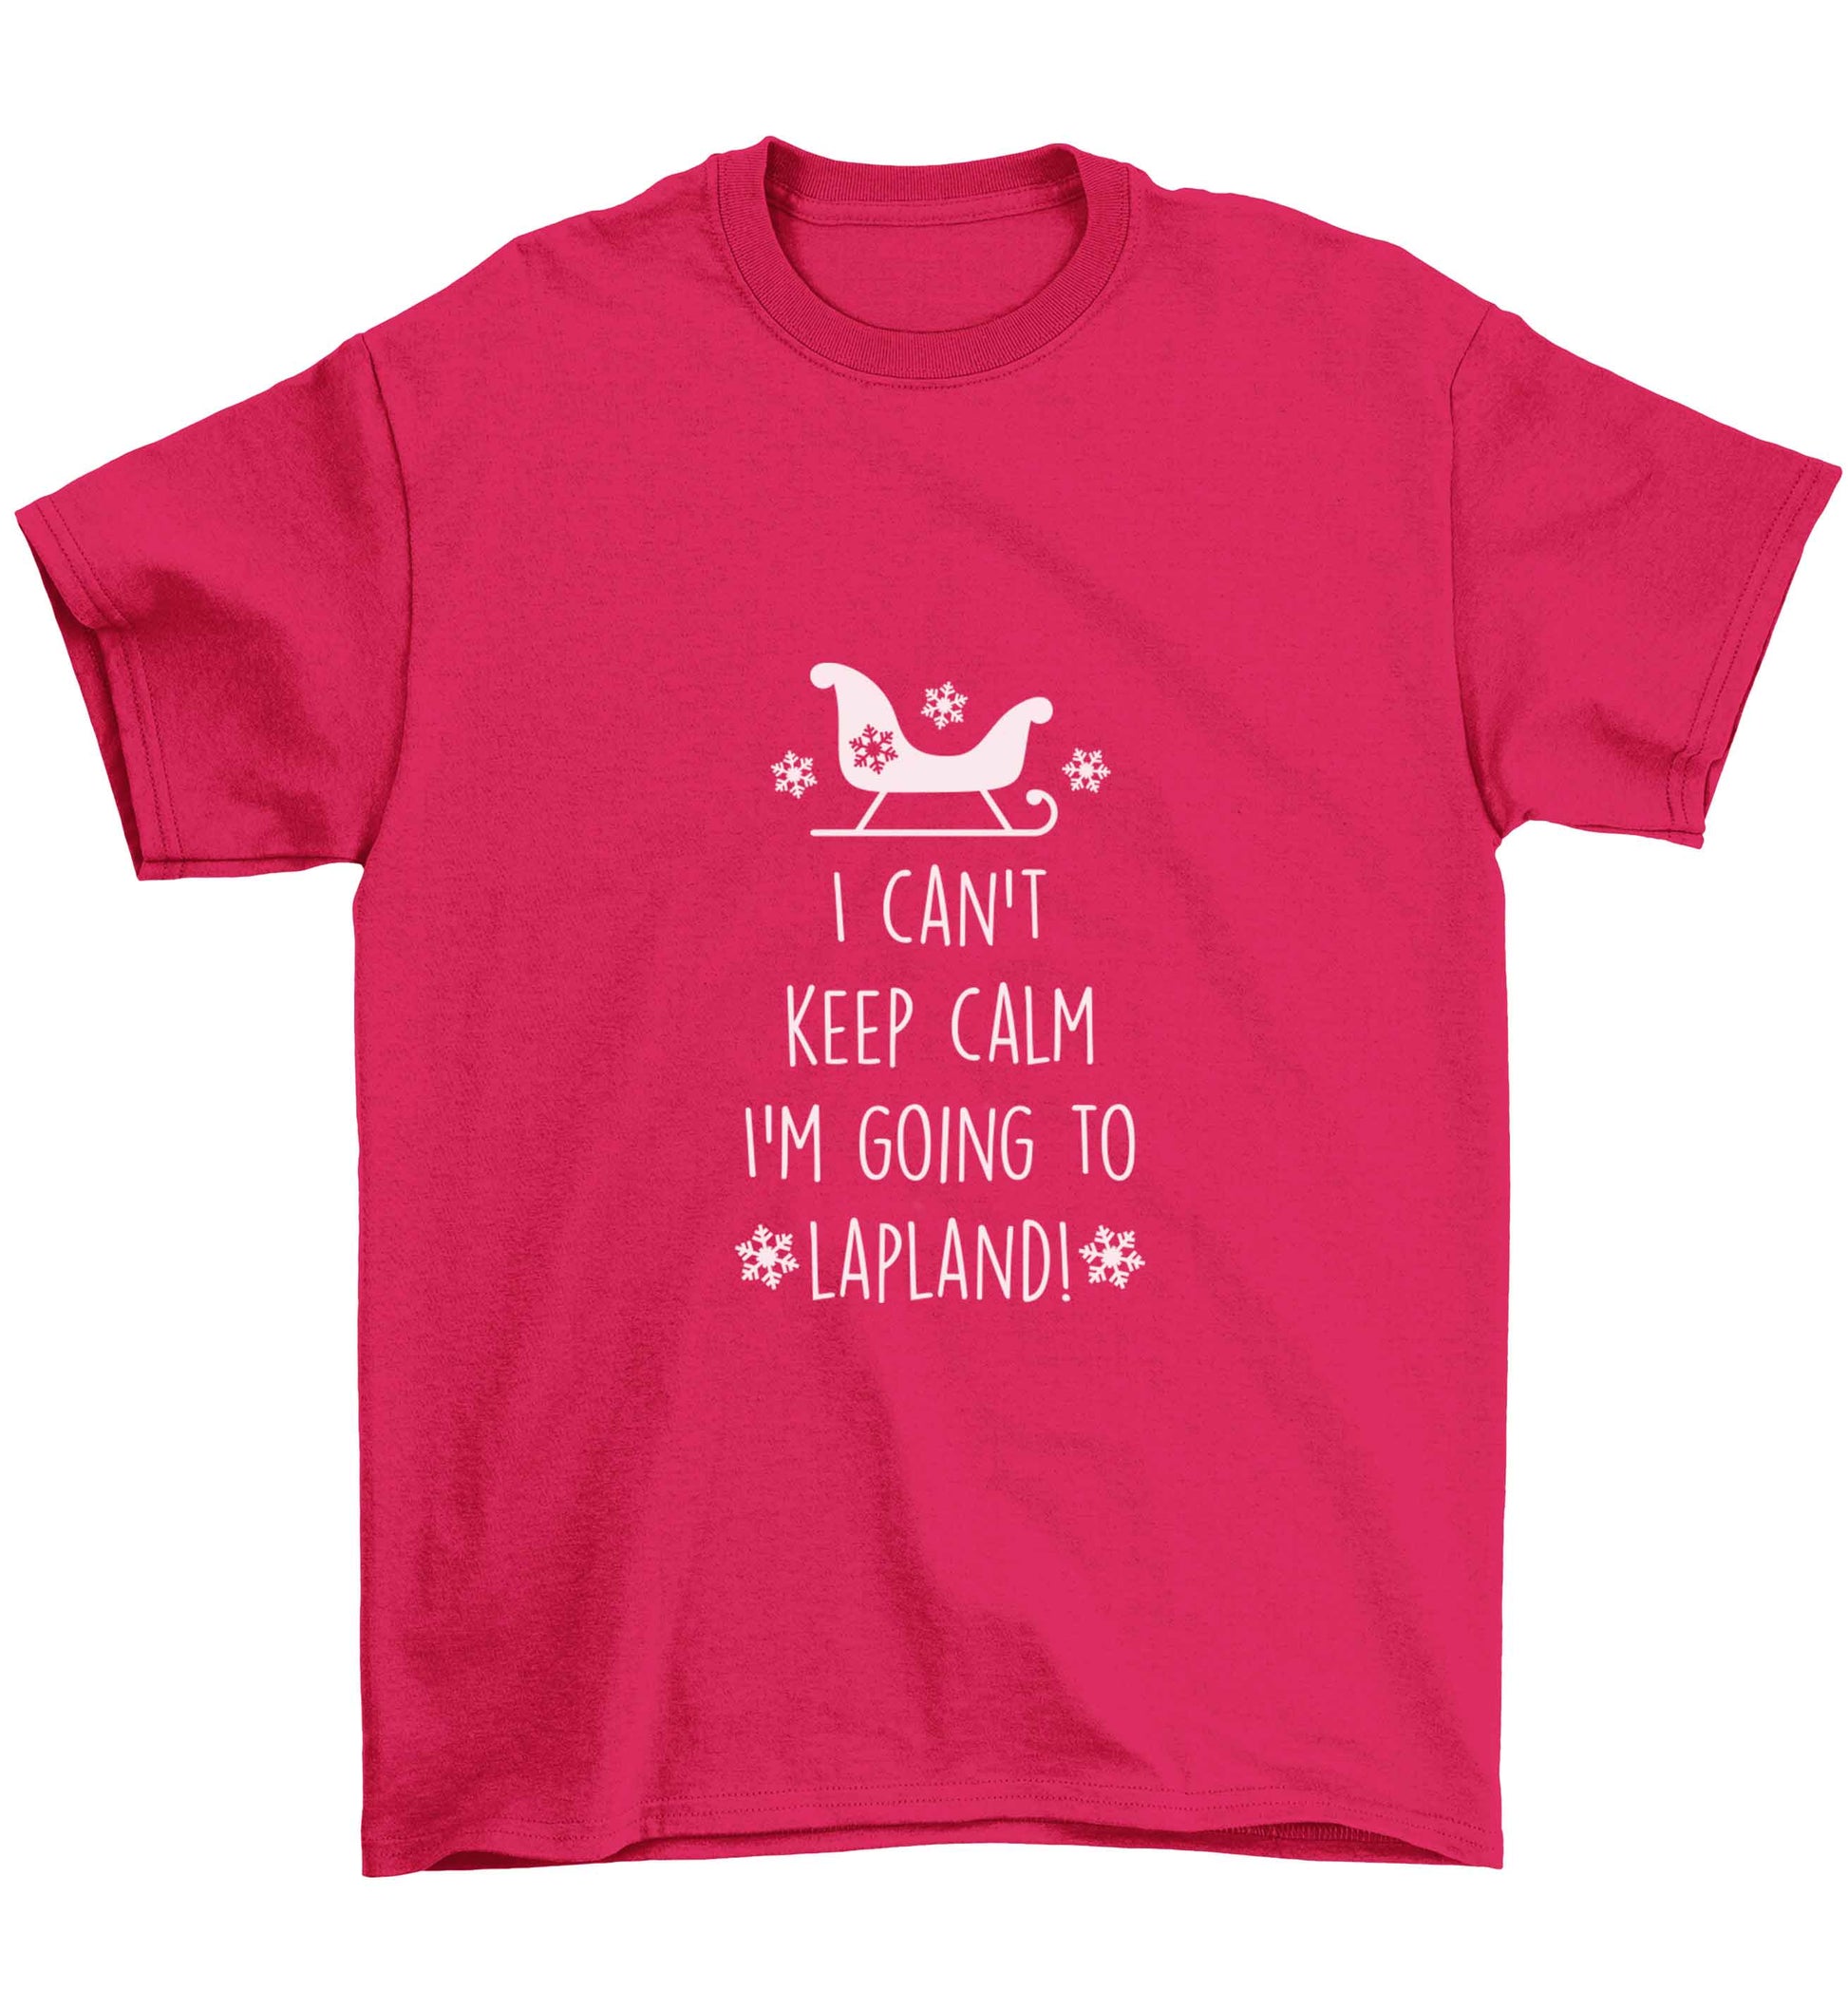 I can't keep calm I'm going to Lapland Children's pink Tshirt 12-13 Years